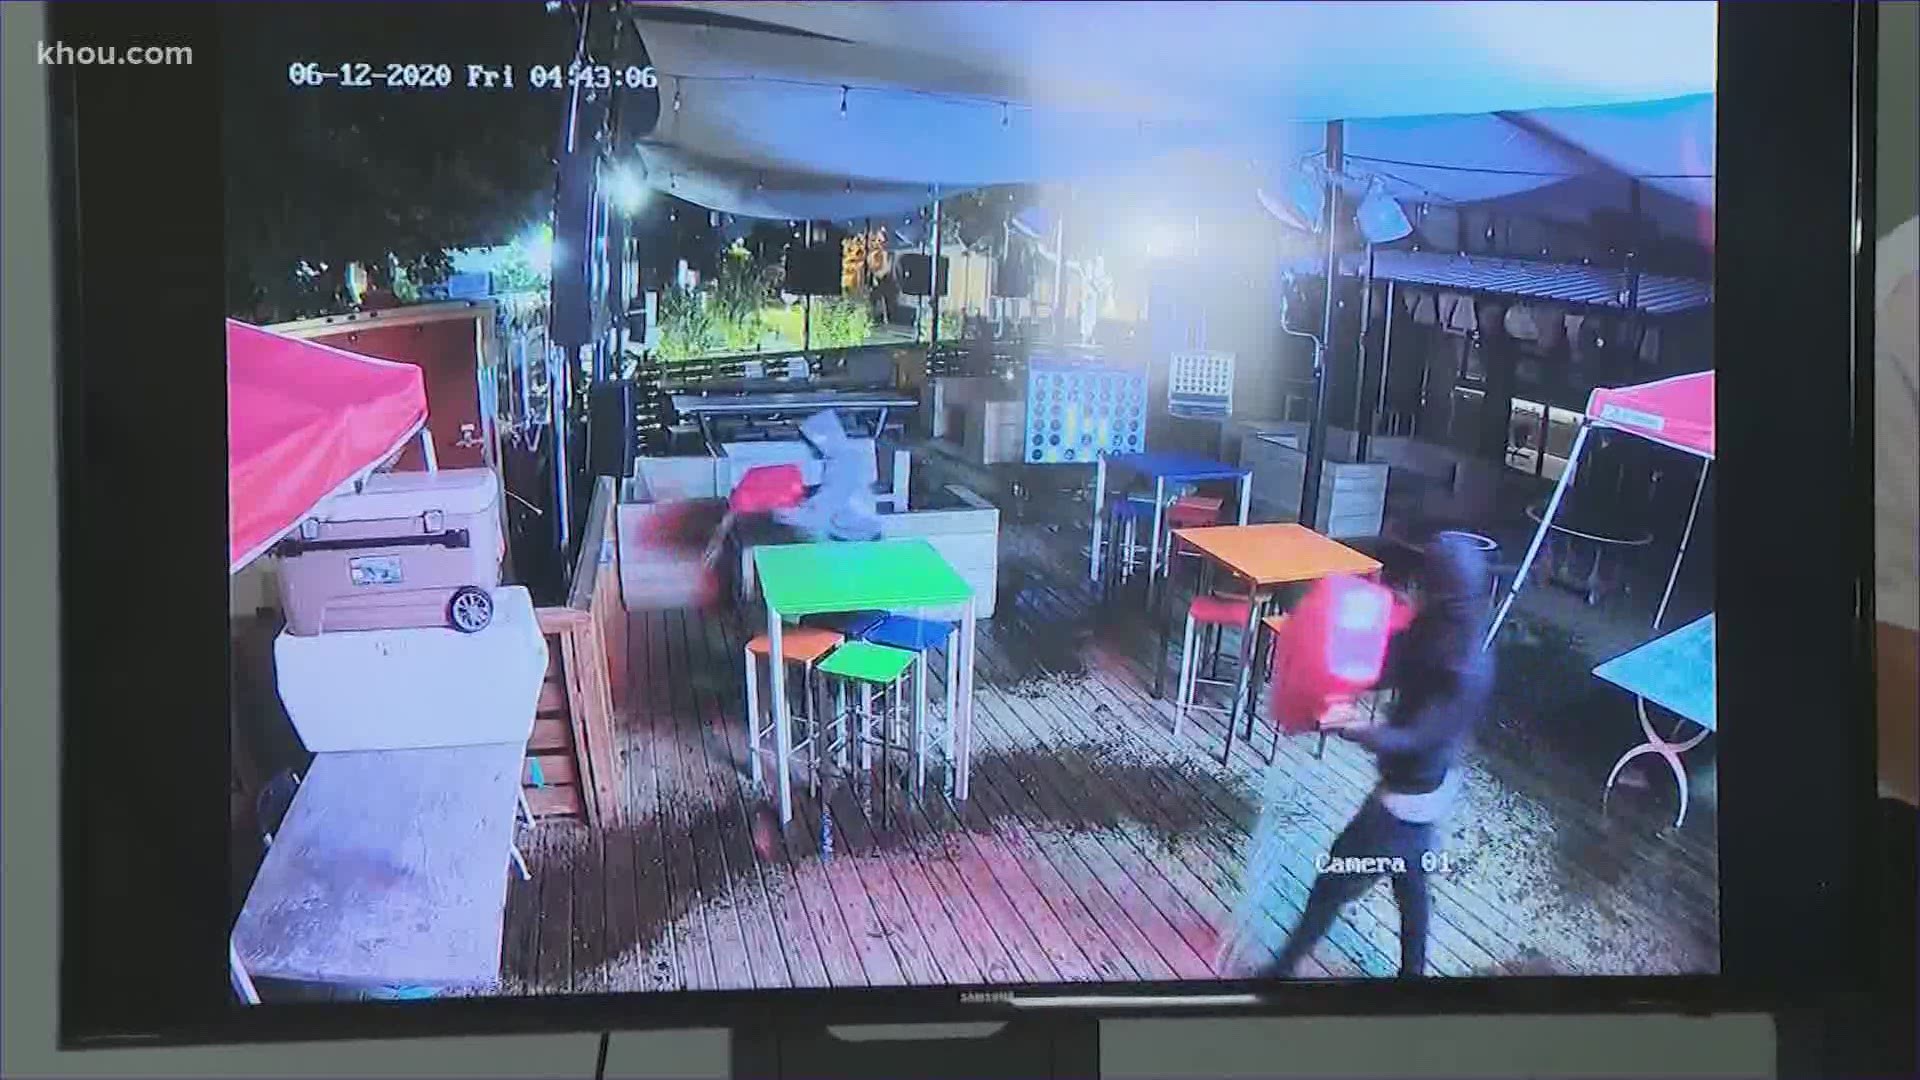 Arson investigators have released surveillance video related to the explosion that damaged Bar 5015 on Almeda last week with hopes the public may recognize the men.